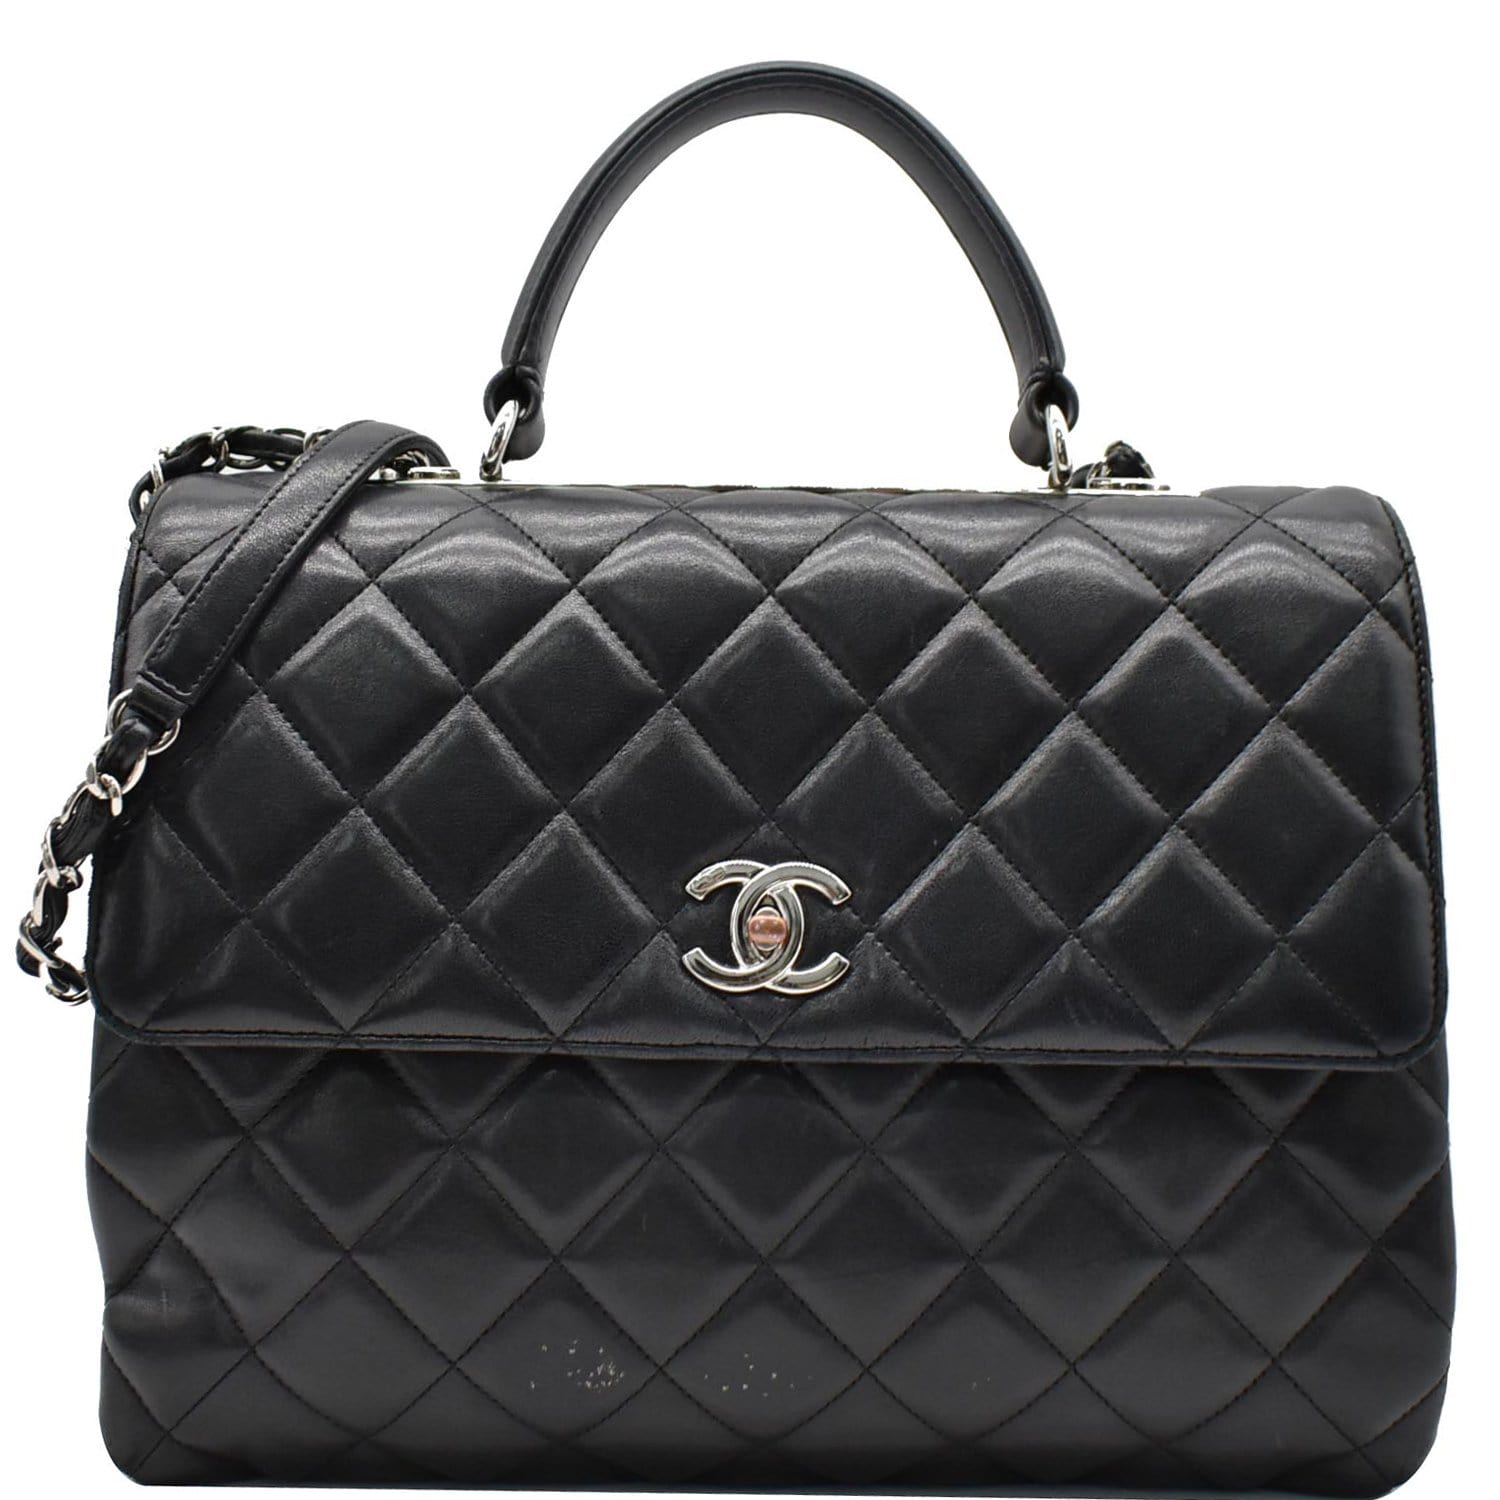 Chanel Black Quilted Lambskin Mini CC in Love Heart Bag Pale Gold Hardware, 2021 (Like New)